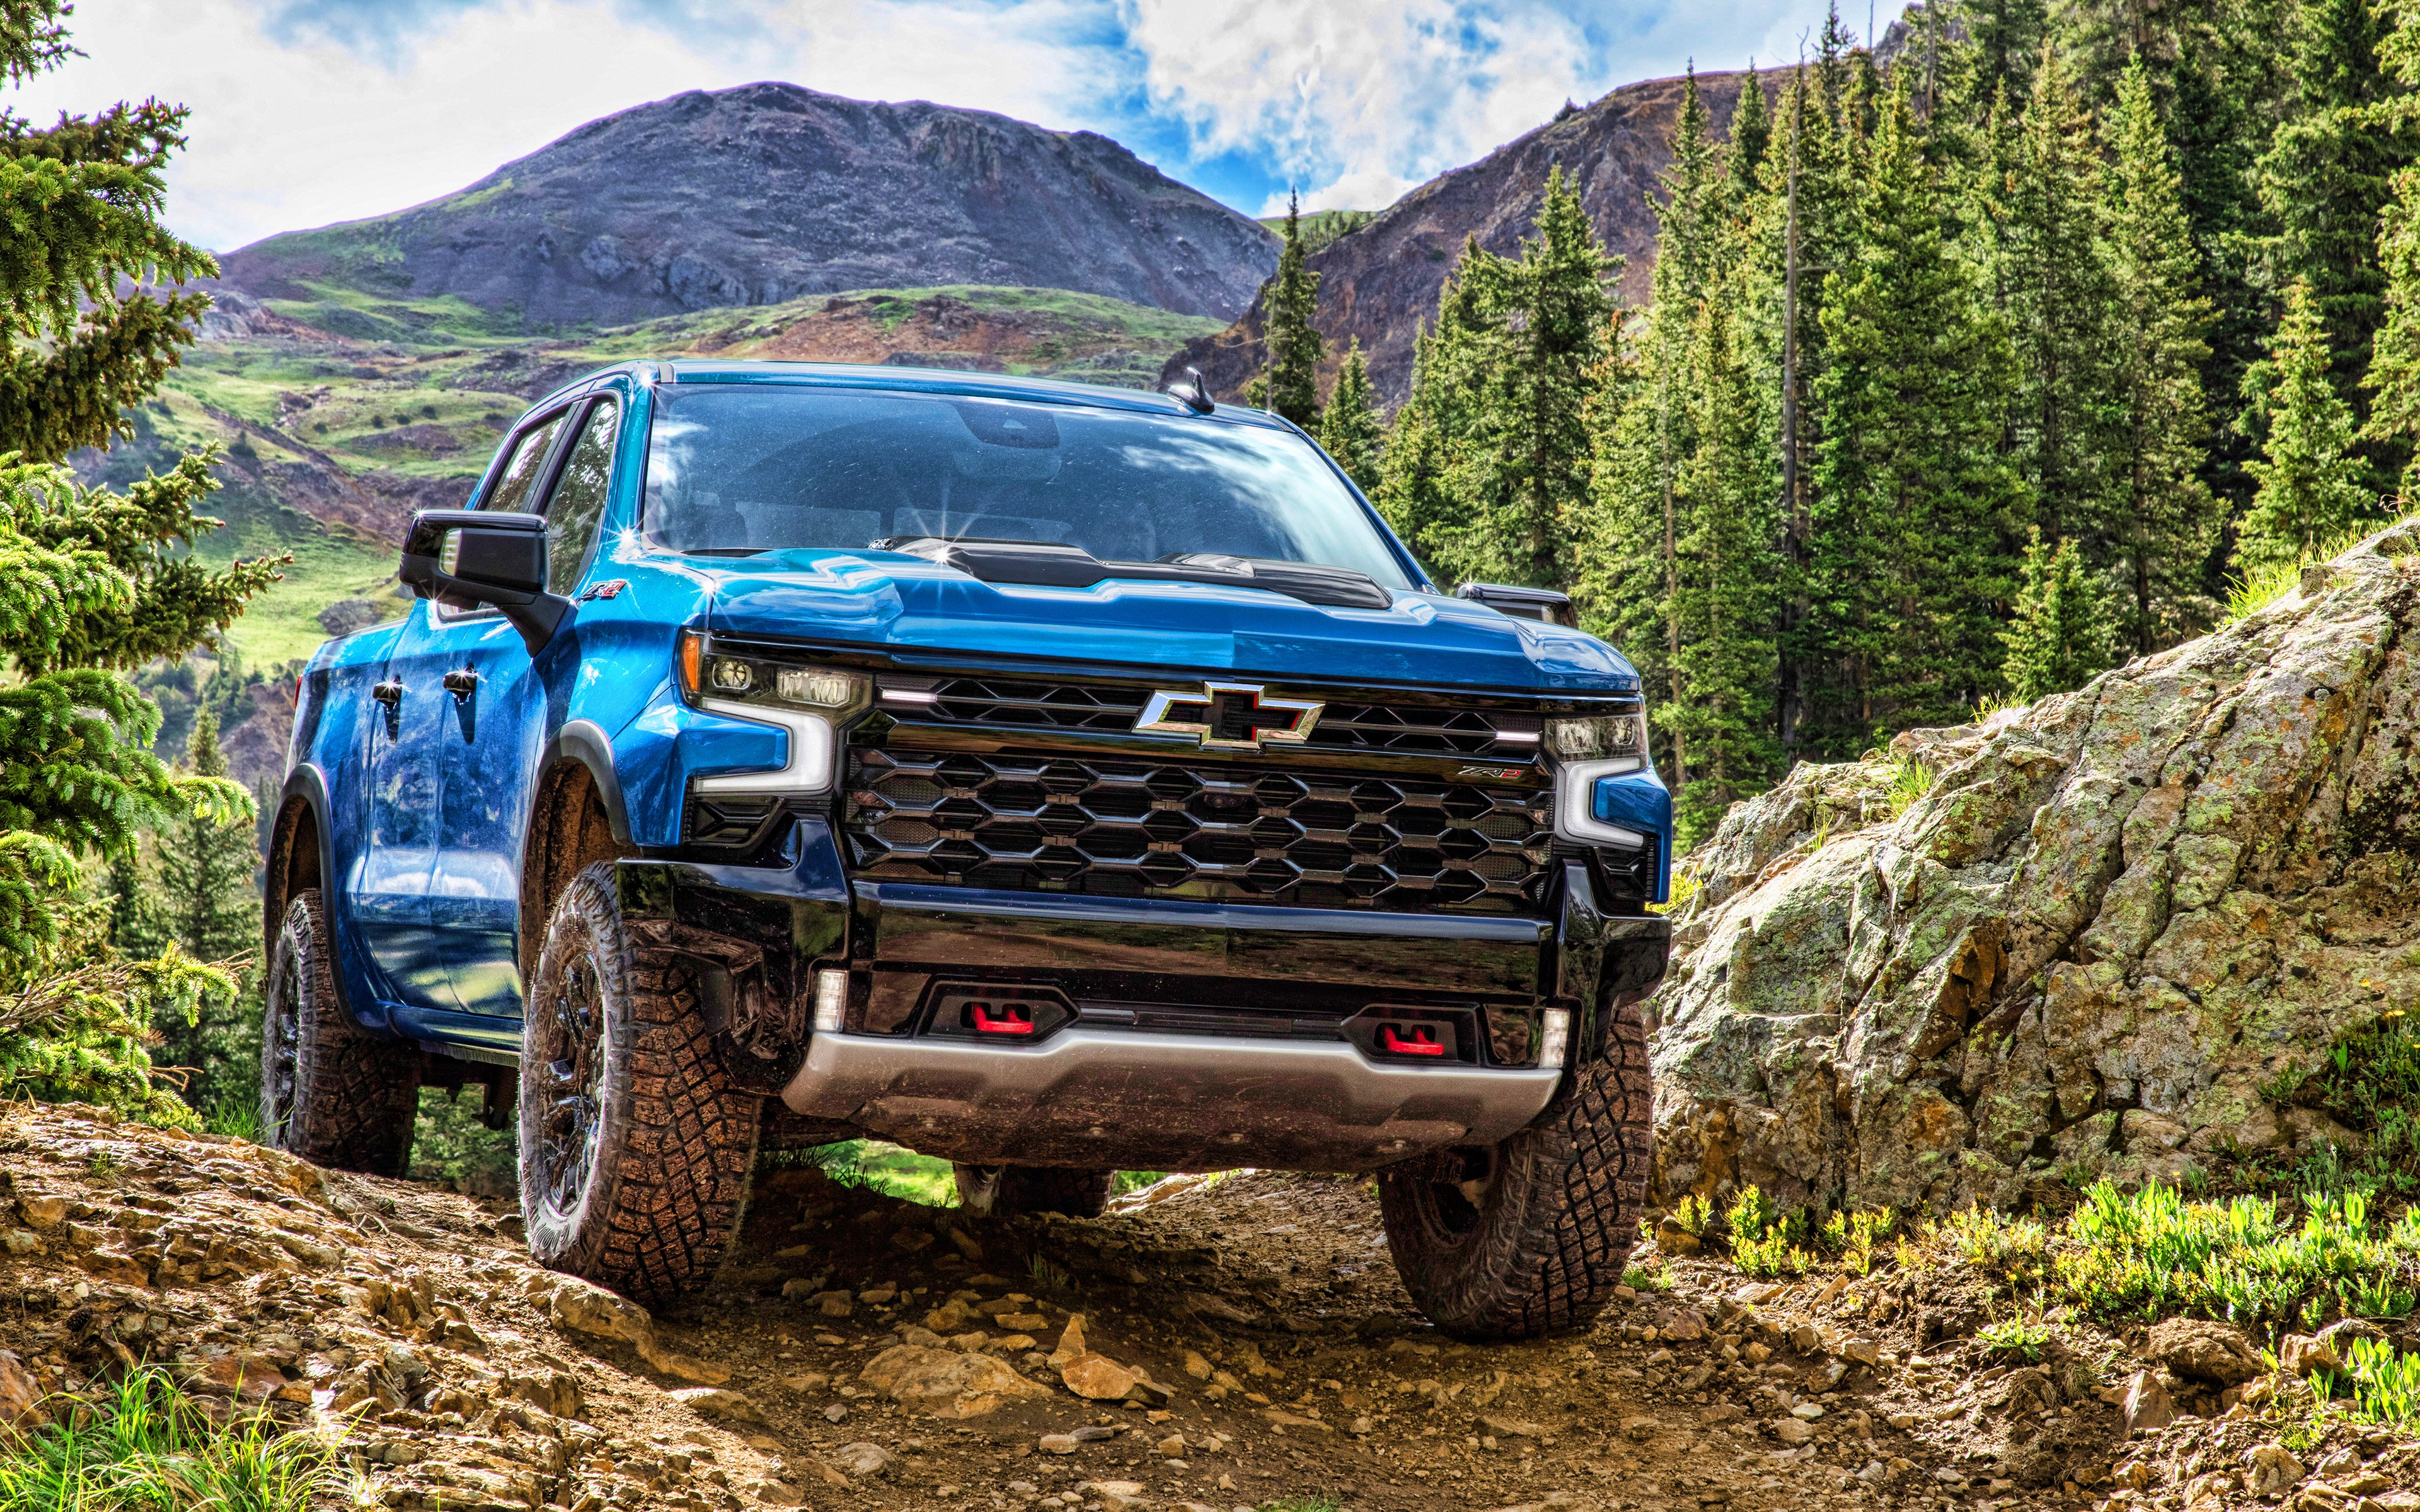 Download wallpaper Chevrolet Silverado ZR 4k, offroad, 2022 cars, SUVs, HDR, 2022 Chevrolet Silverado, american cars, Chevrolet for desktop with resolution 3840x2400. High Quality HD picture wallpaper